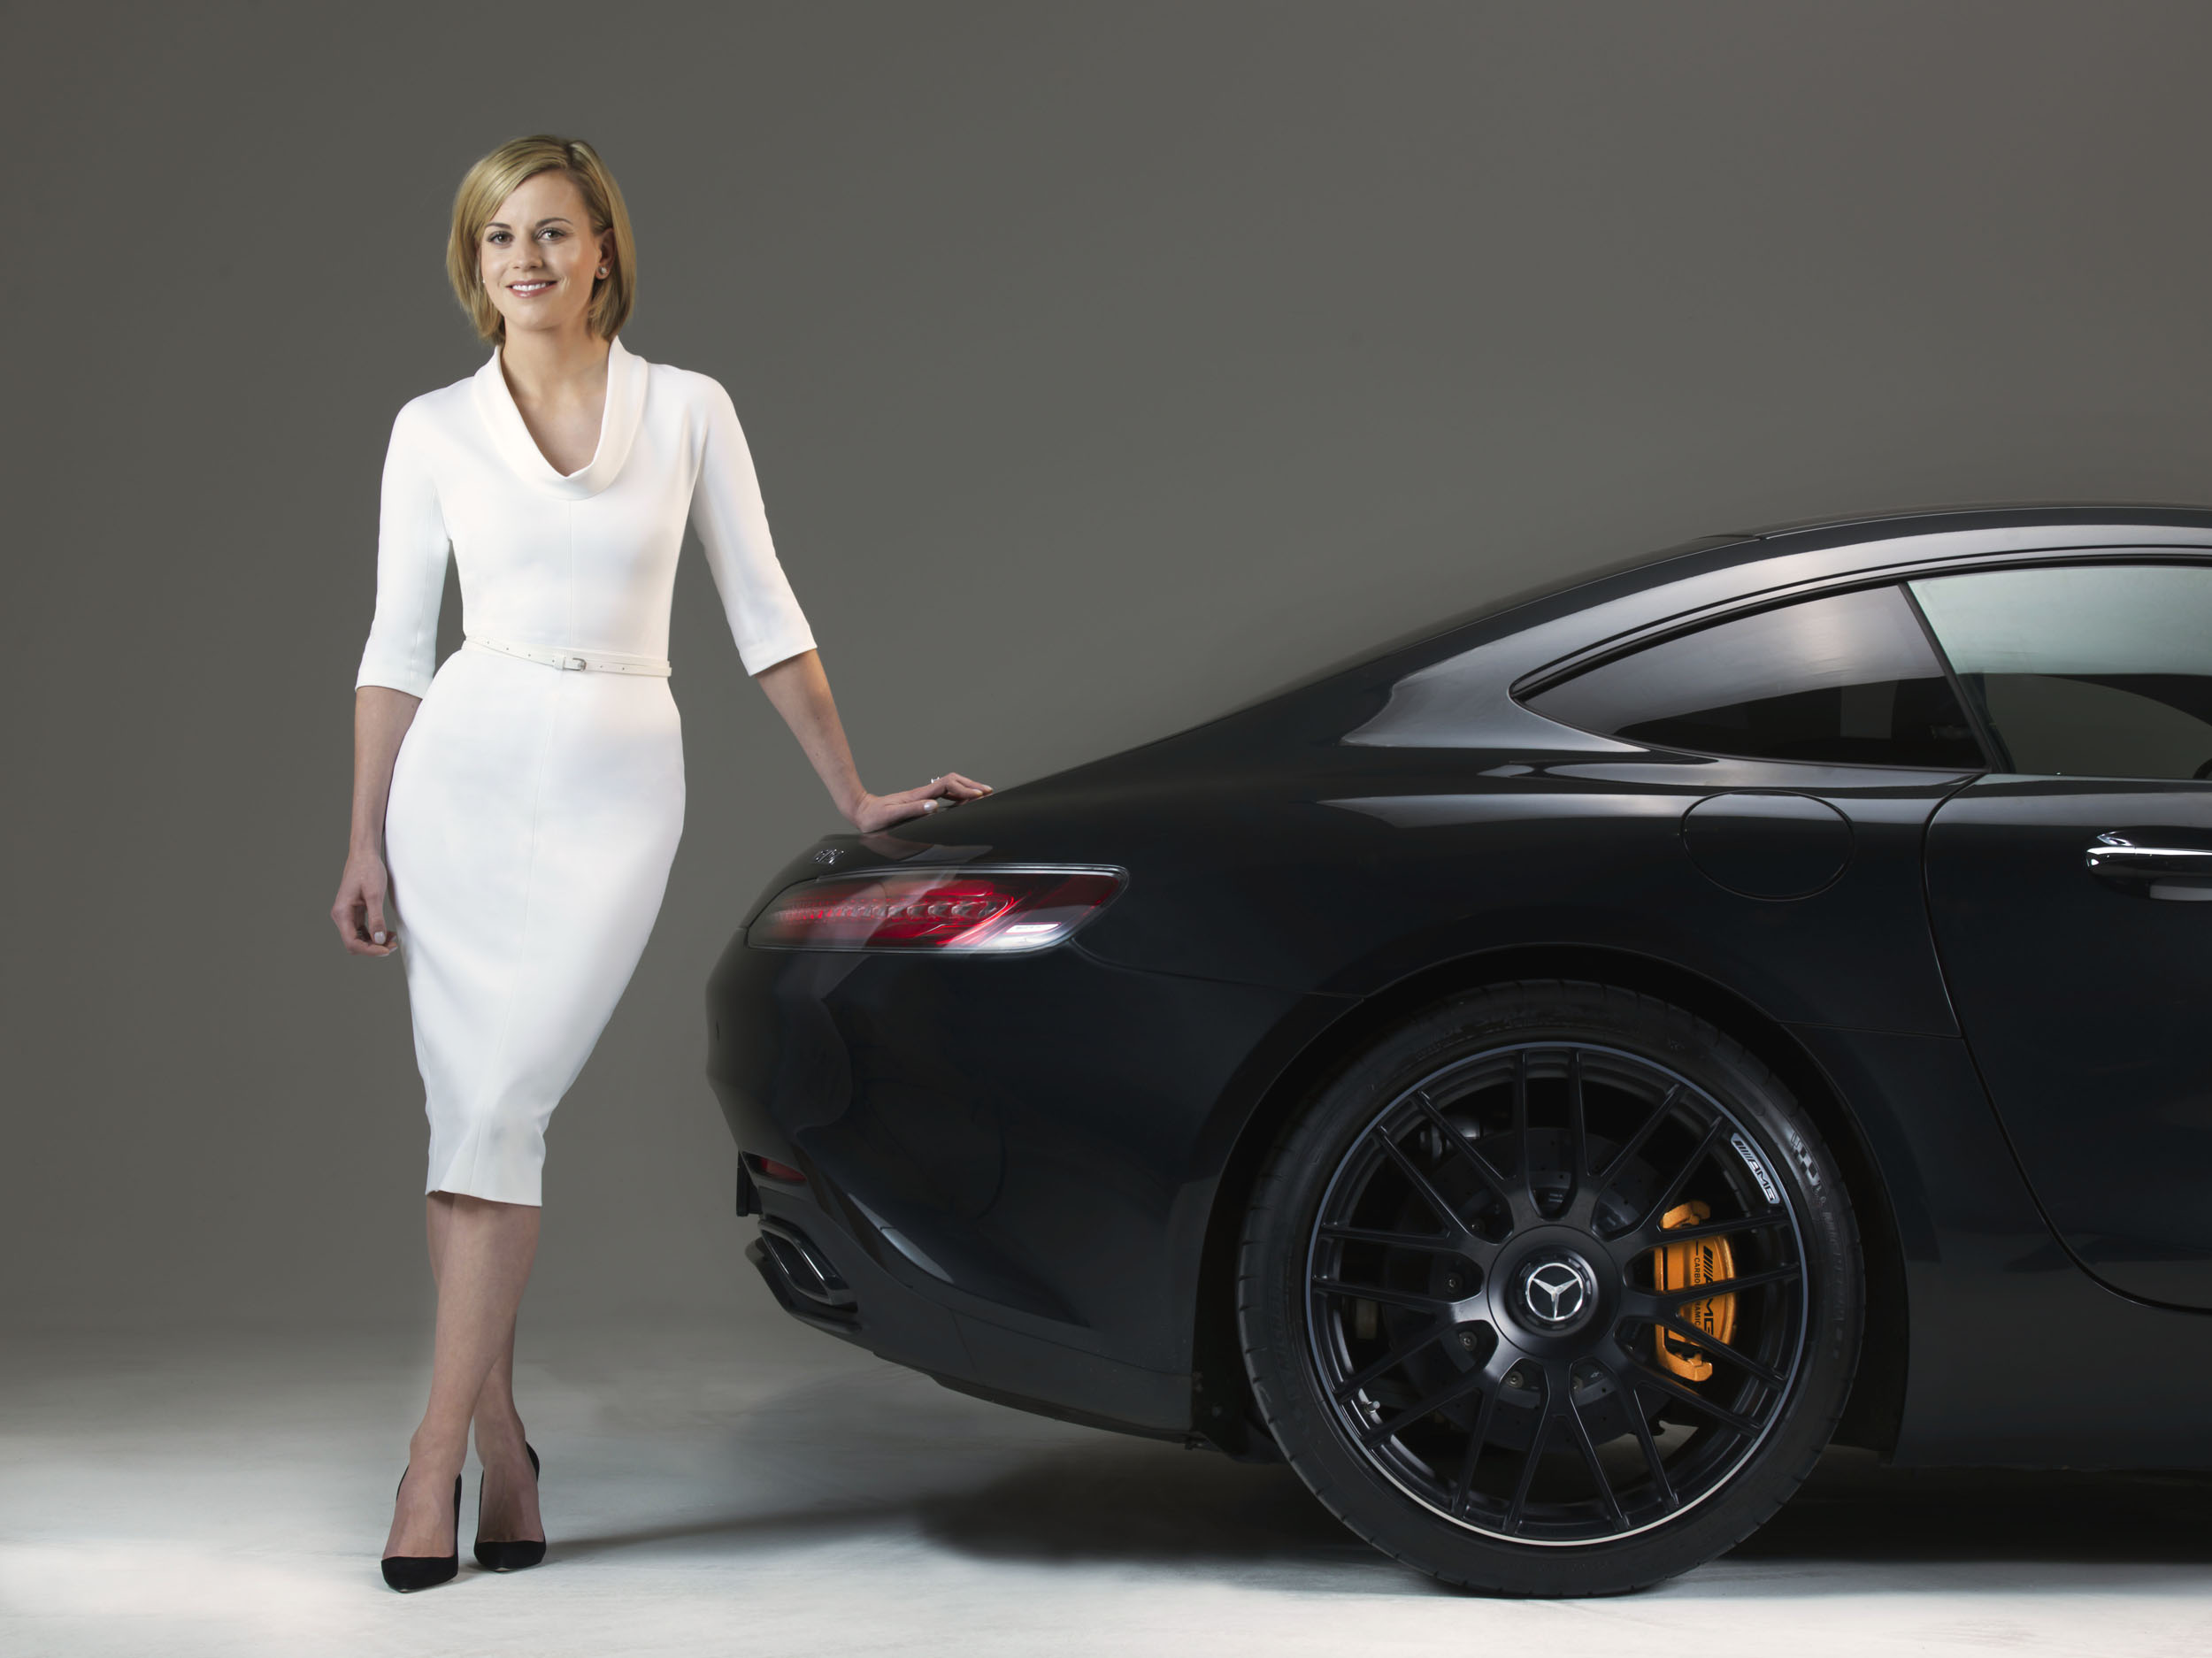 Susie Wolff  Photographed by Neale Haynes in London 19/4/2016 photo credit nealehaynes.com